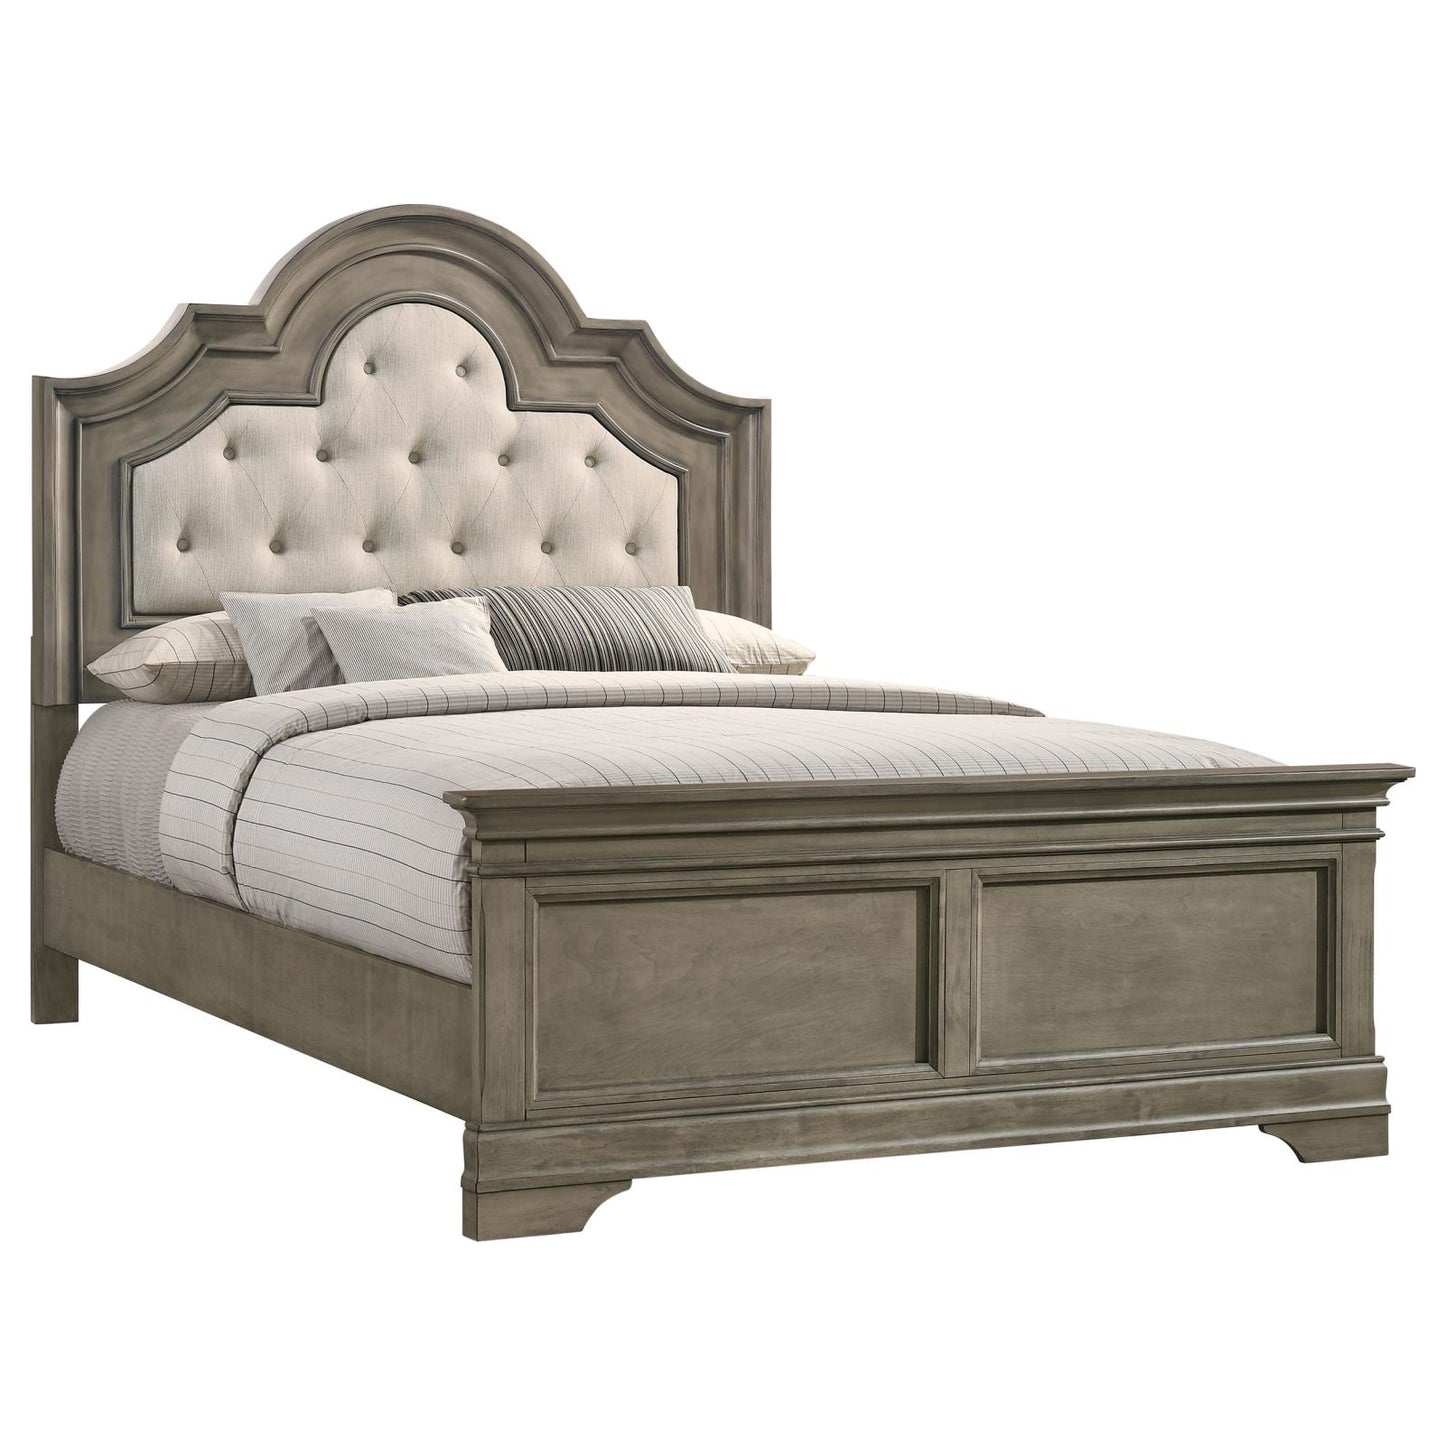 Manchester Bed with Upholstered Arched Headboard Beige and Wheat